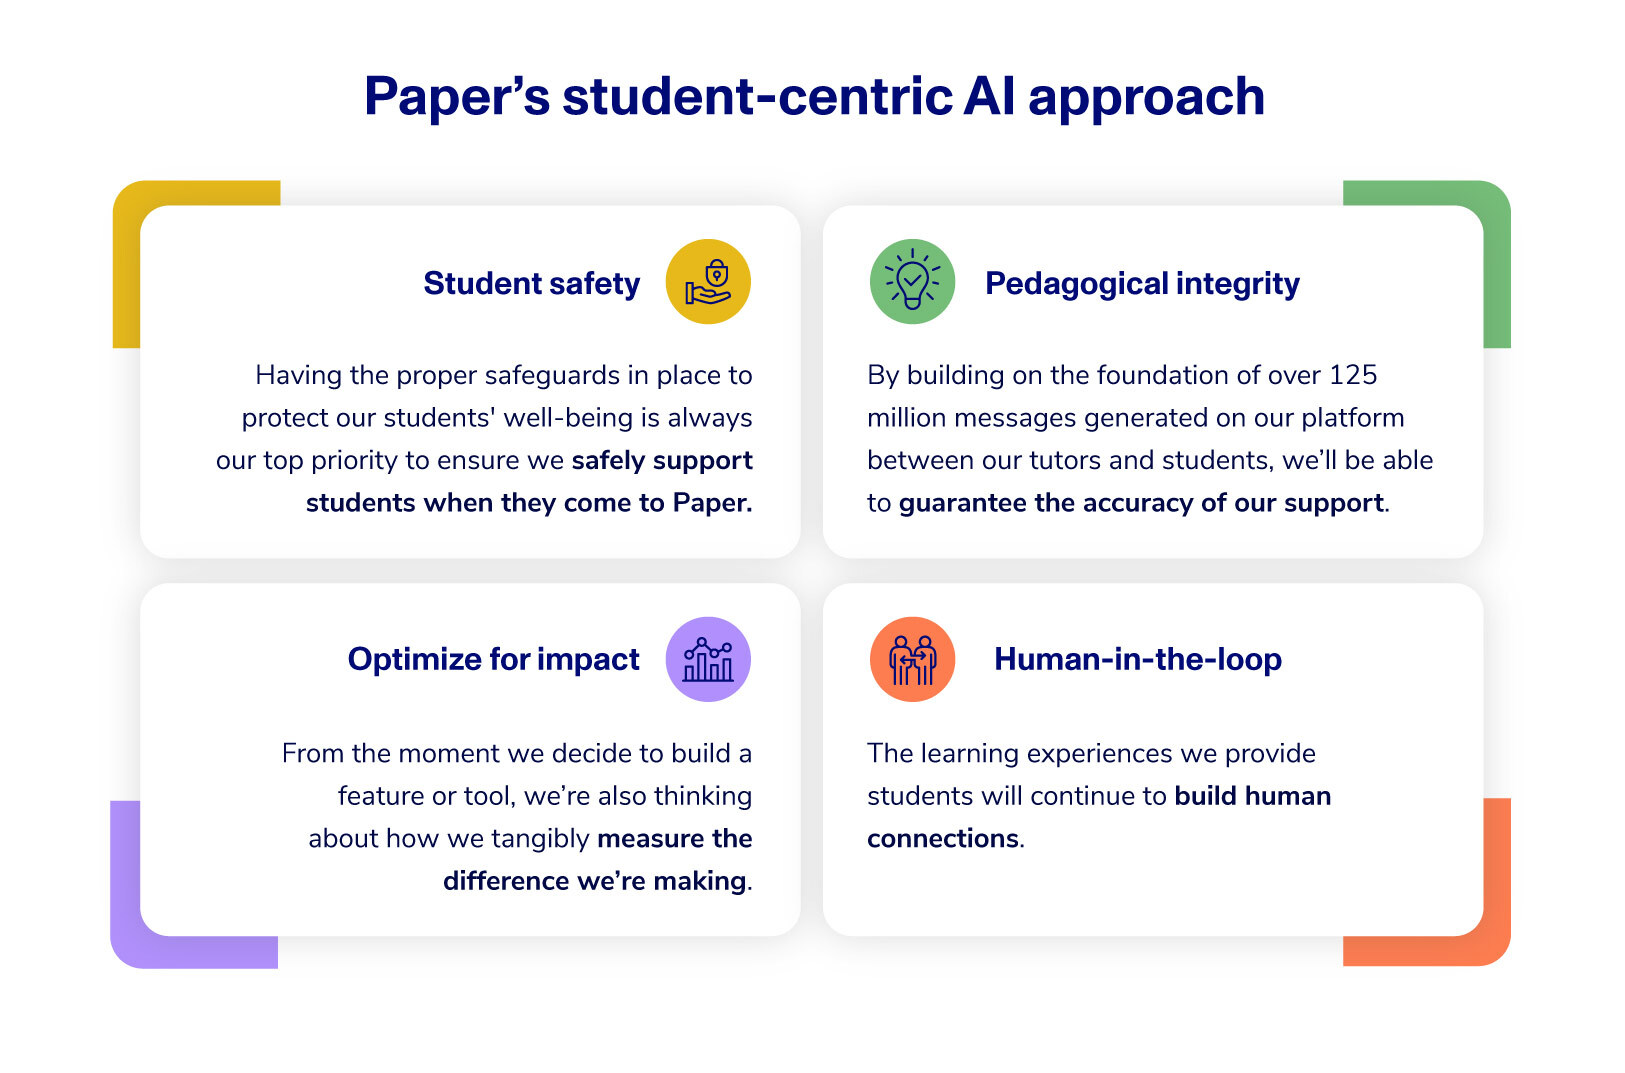 A graphic depicts the four pillars of Paper's student-centric AI approach: student safety, pedagogical integrity, optimizing for impact, and human connections.